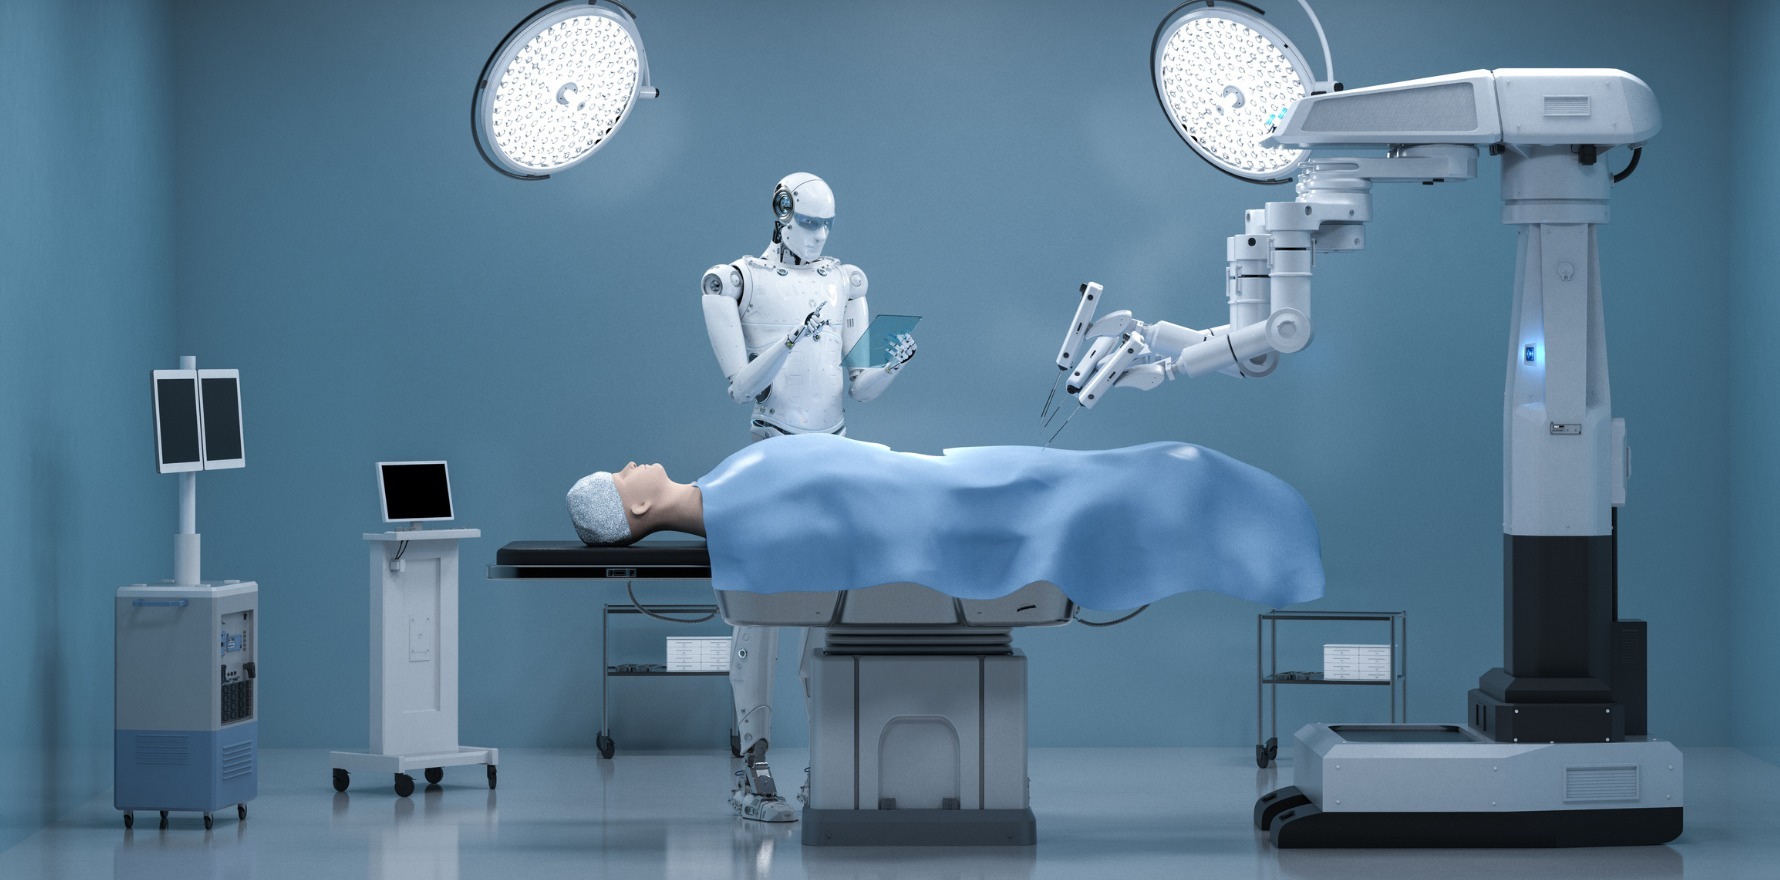 Surgeons to blame for evidence gap on robots - Oncology Republic